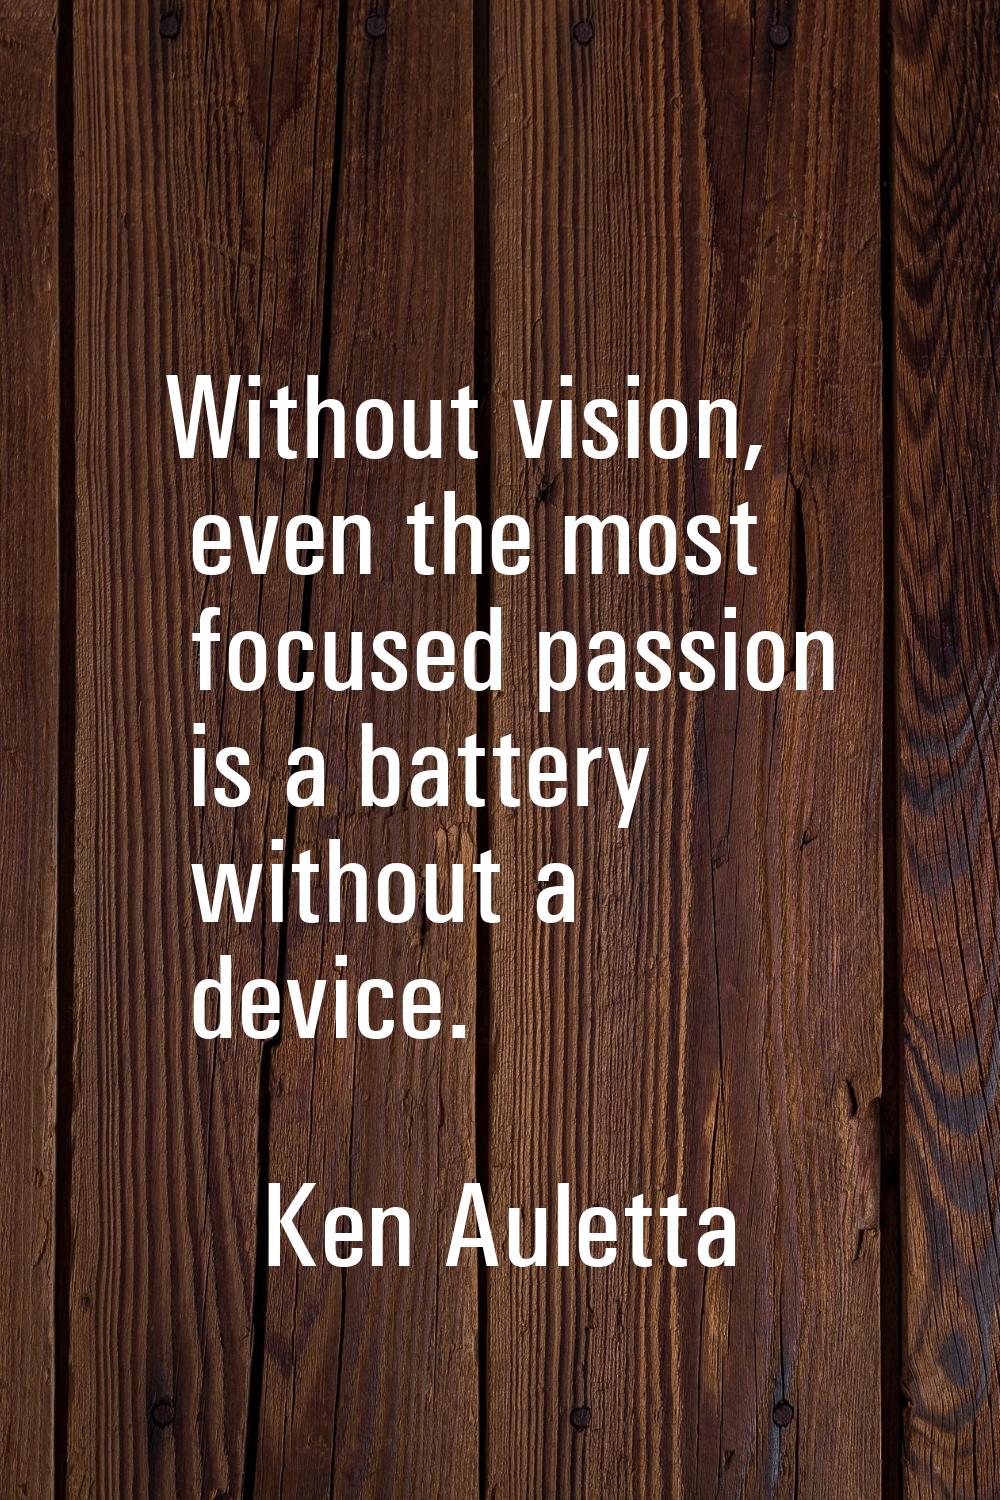 Without vision, even the most focused passion is a battery without a device.